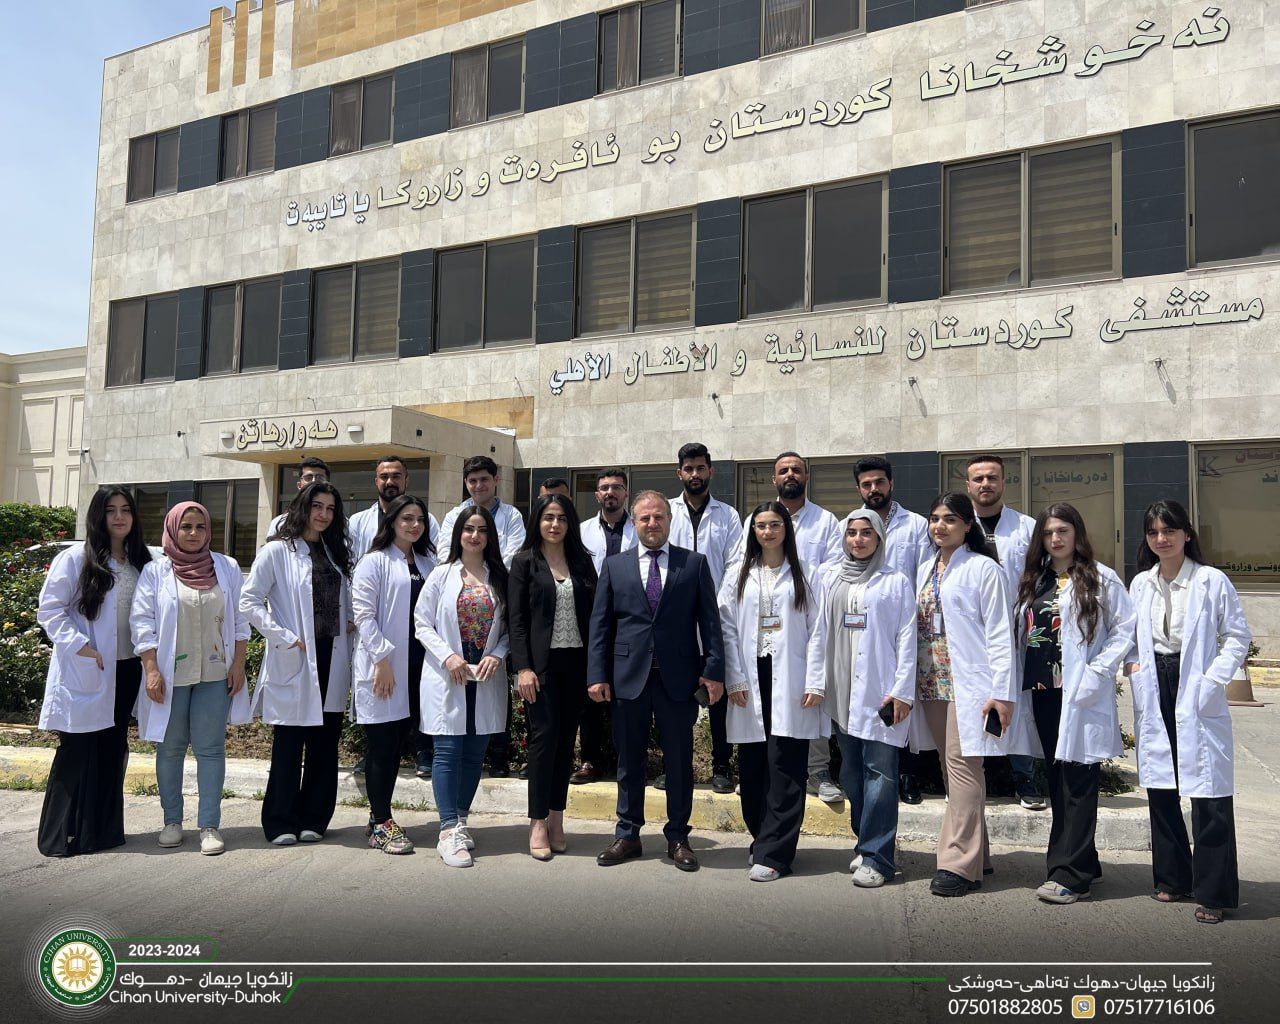 The College of Pharmacy at Cihan University-Duhok organized a scientific visit to hospital pharmacy